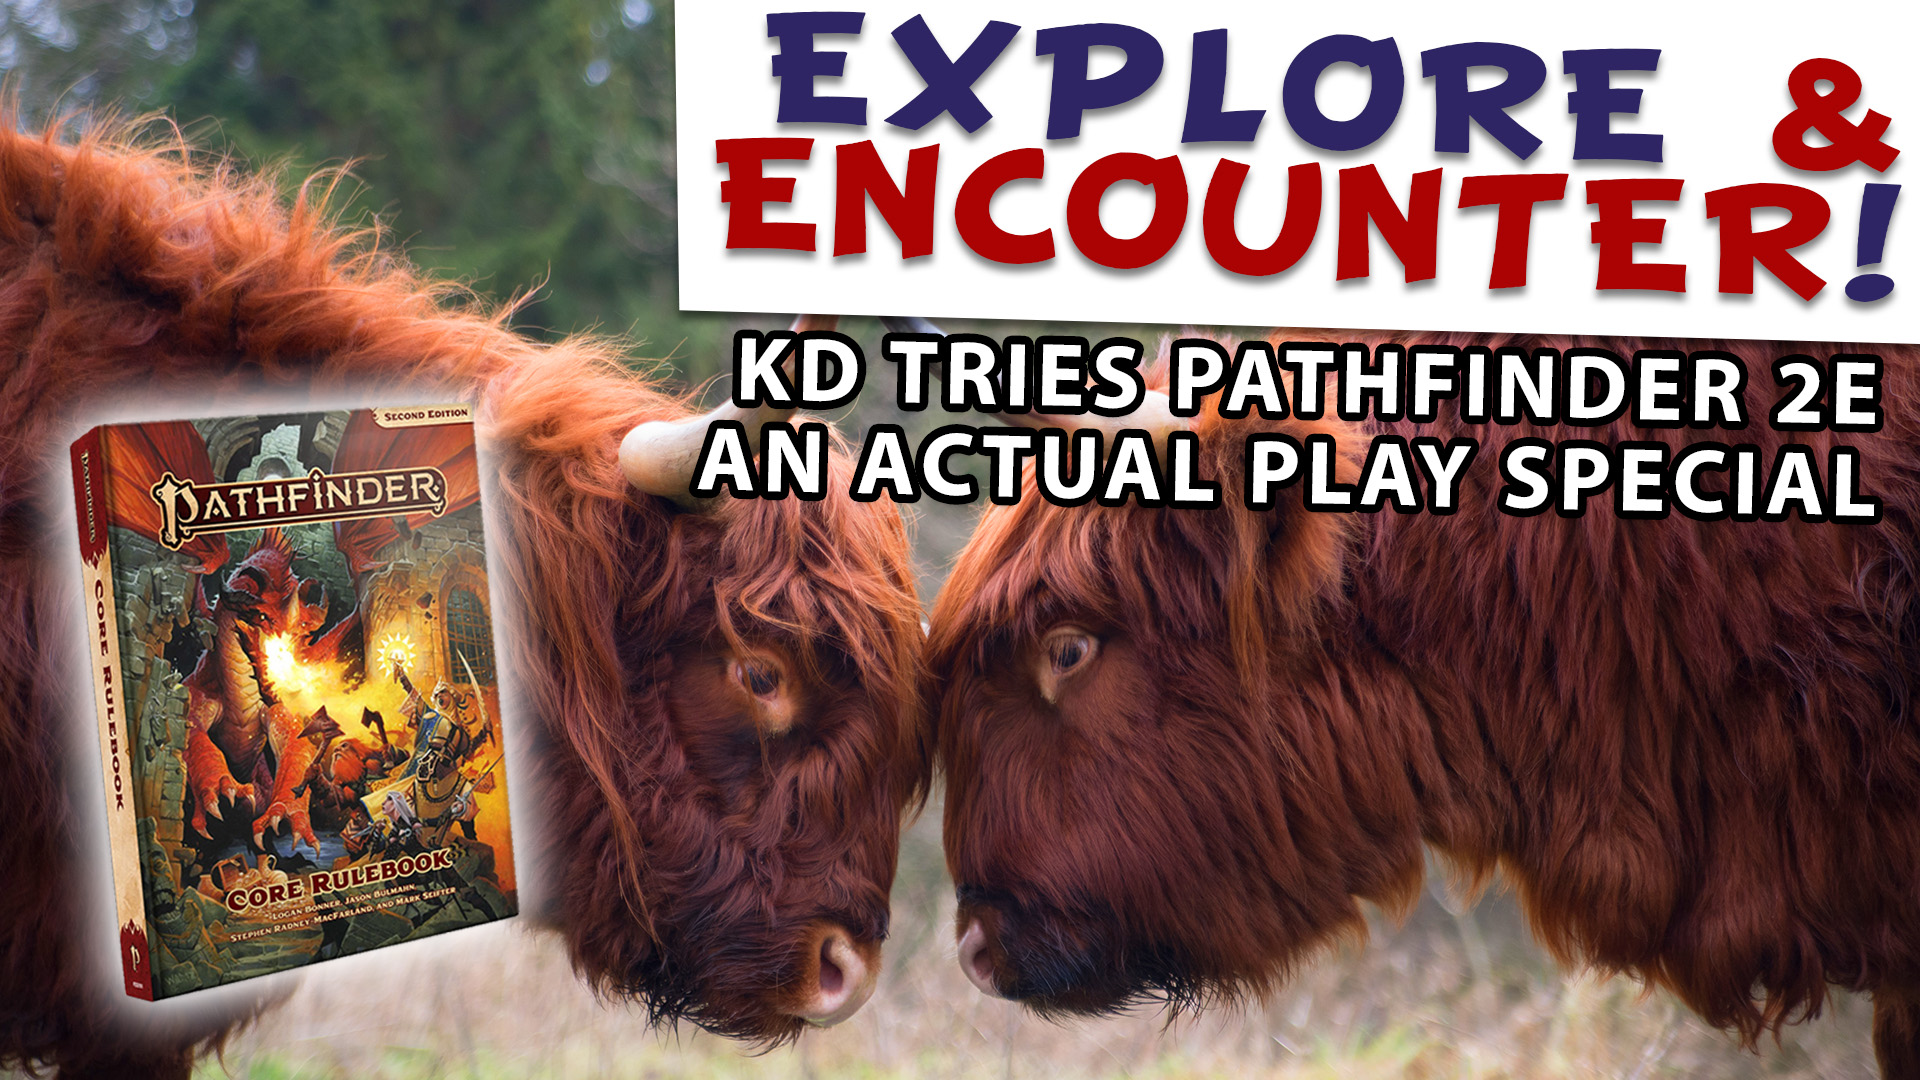 Explore & Encounter, KD Tries Pathfinder 2e - An Actual Play Special - Two Yaks head butting behind an image of the Pathfinder Roleplaying Game 2nd Edition core rulebook